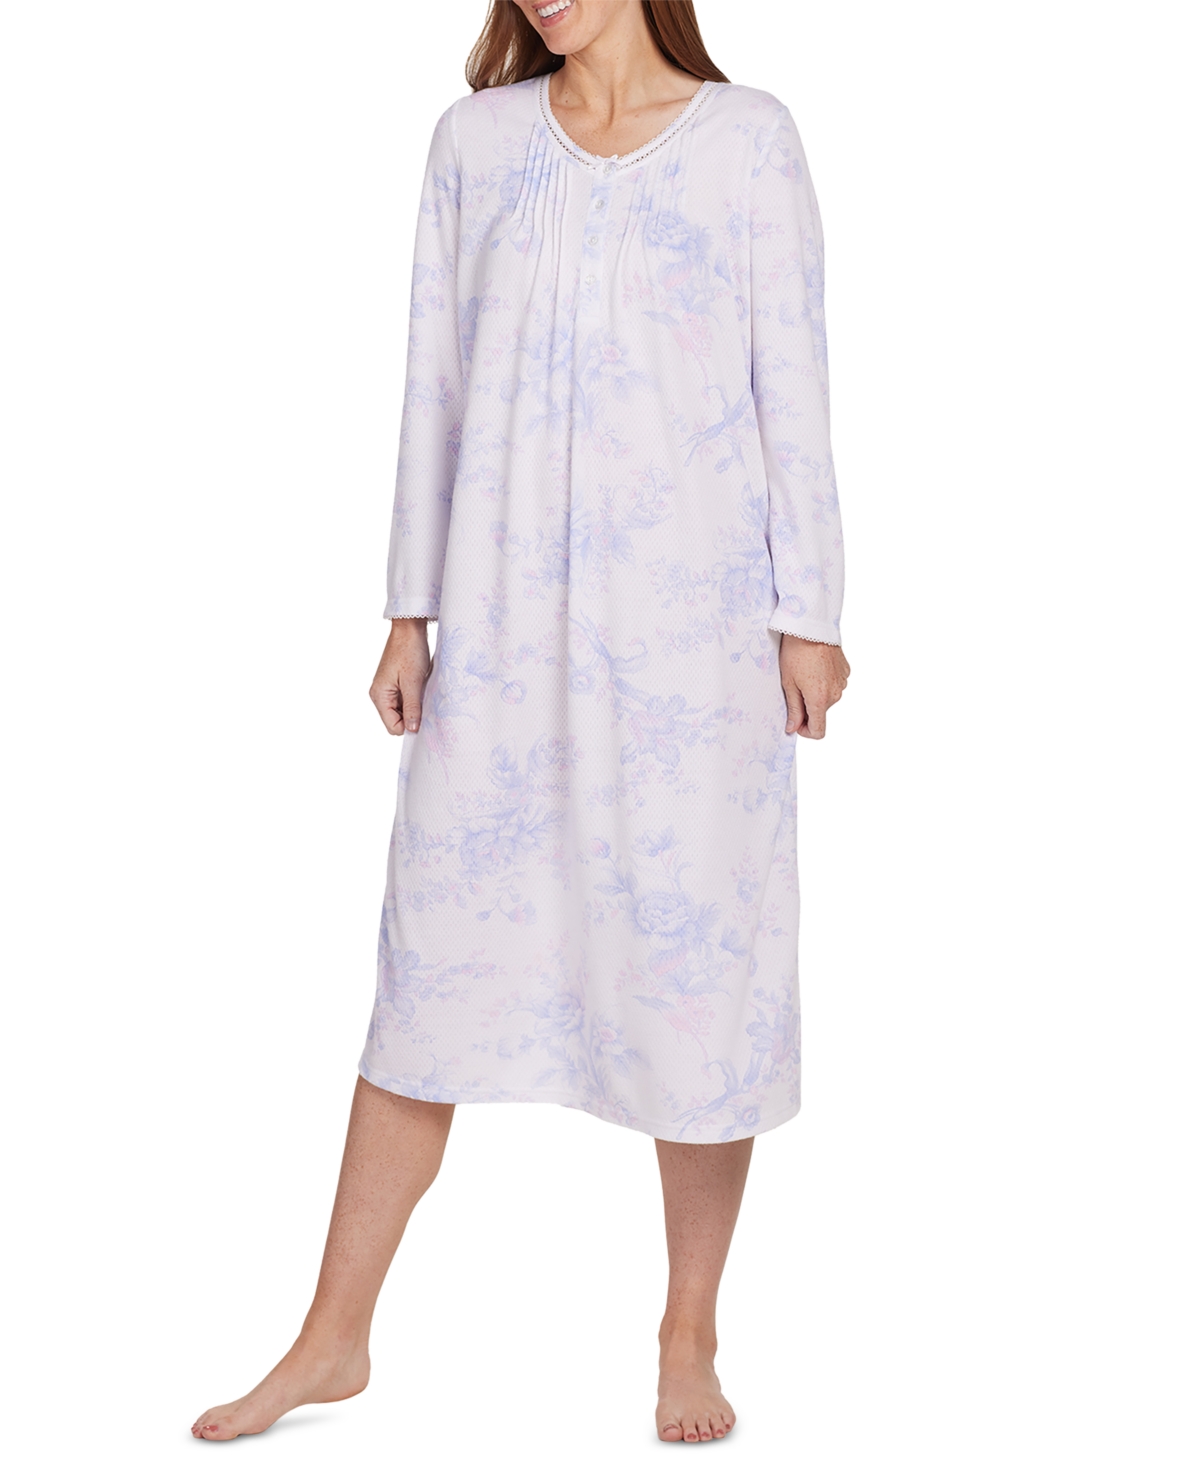 Women's Floral Pintucked Nightgown - Large Lavender Tulip